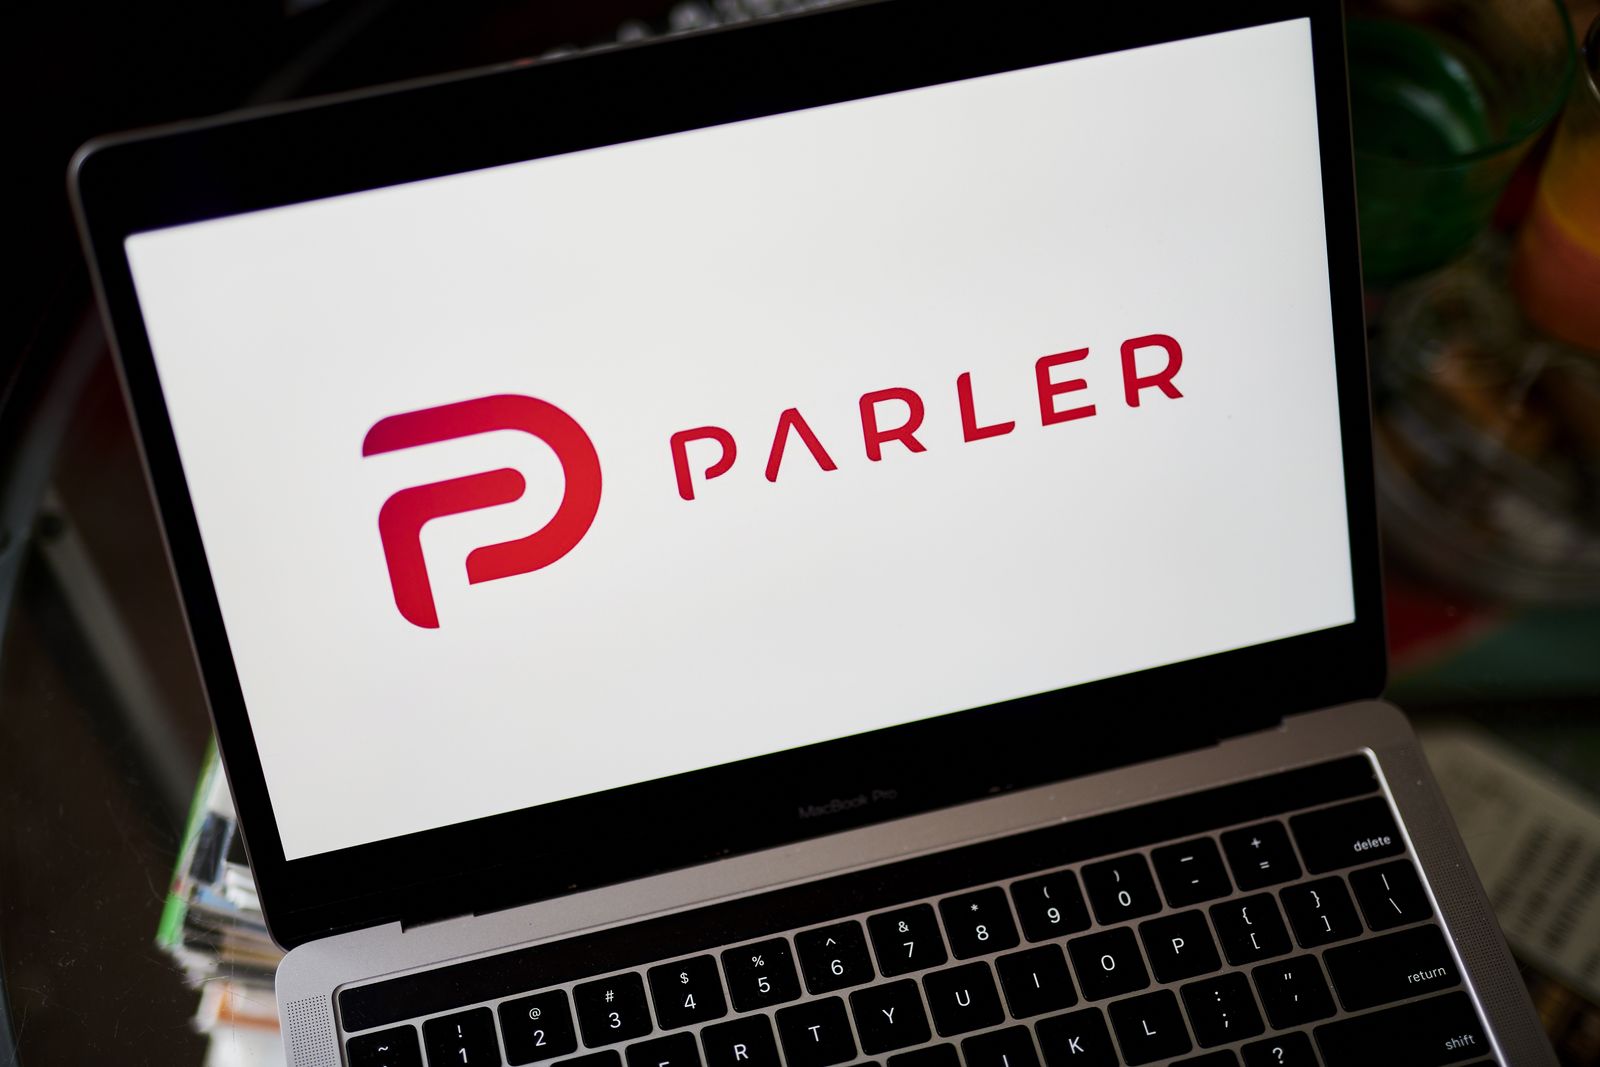 Parler CEO Says Platform Protects User Data And Speech - Bloomberg